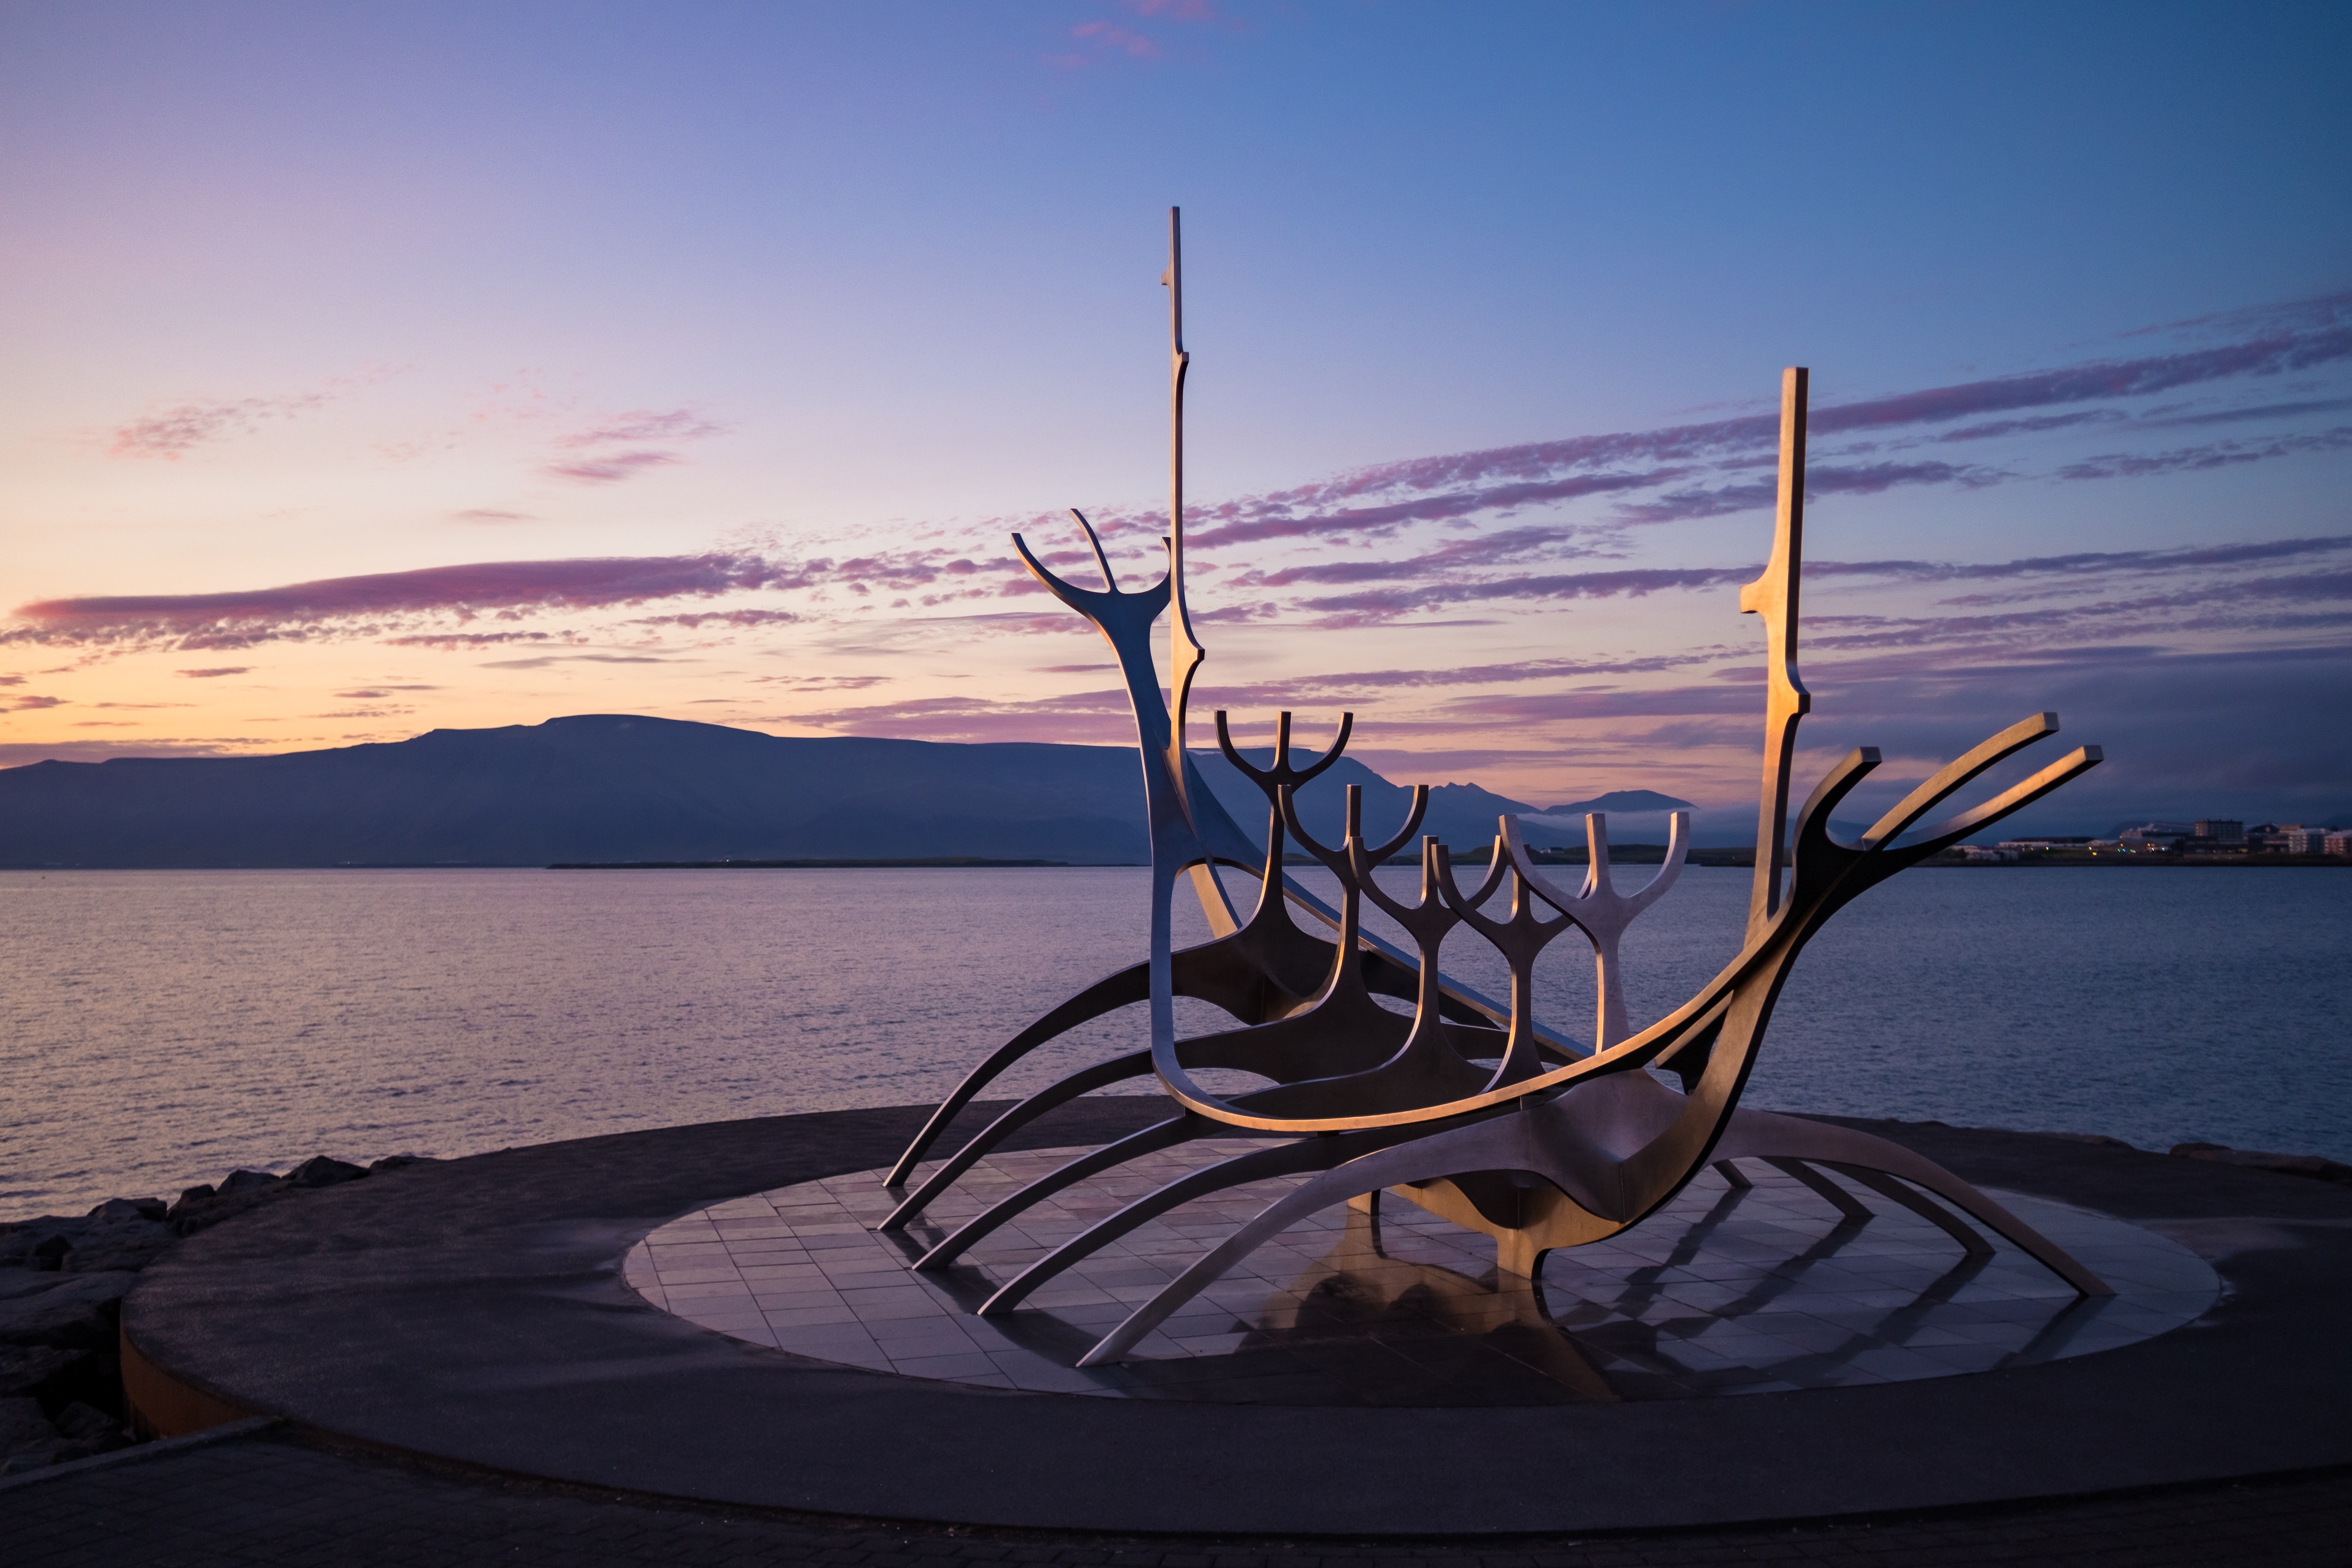 The sun voyager sculpture
Things to do in Reykjavik



